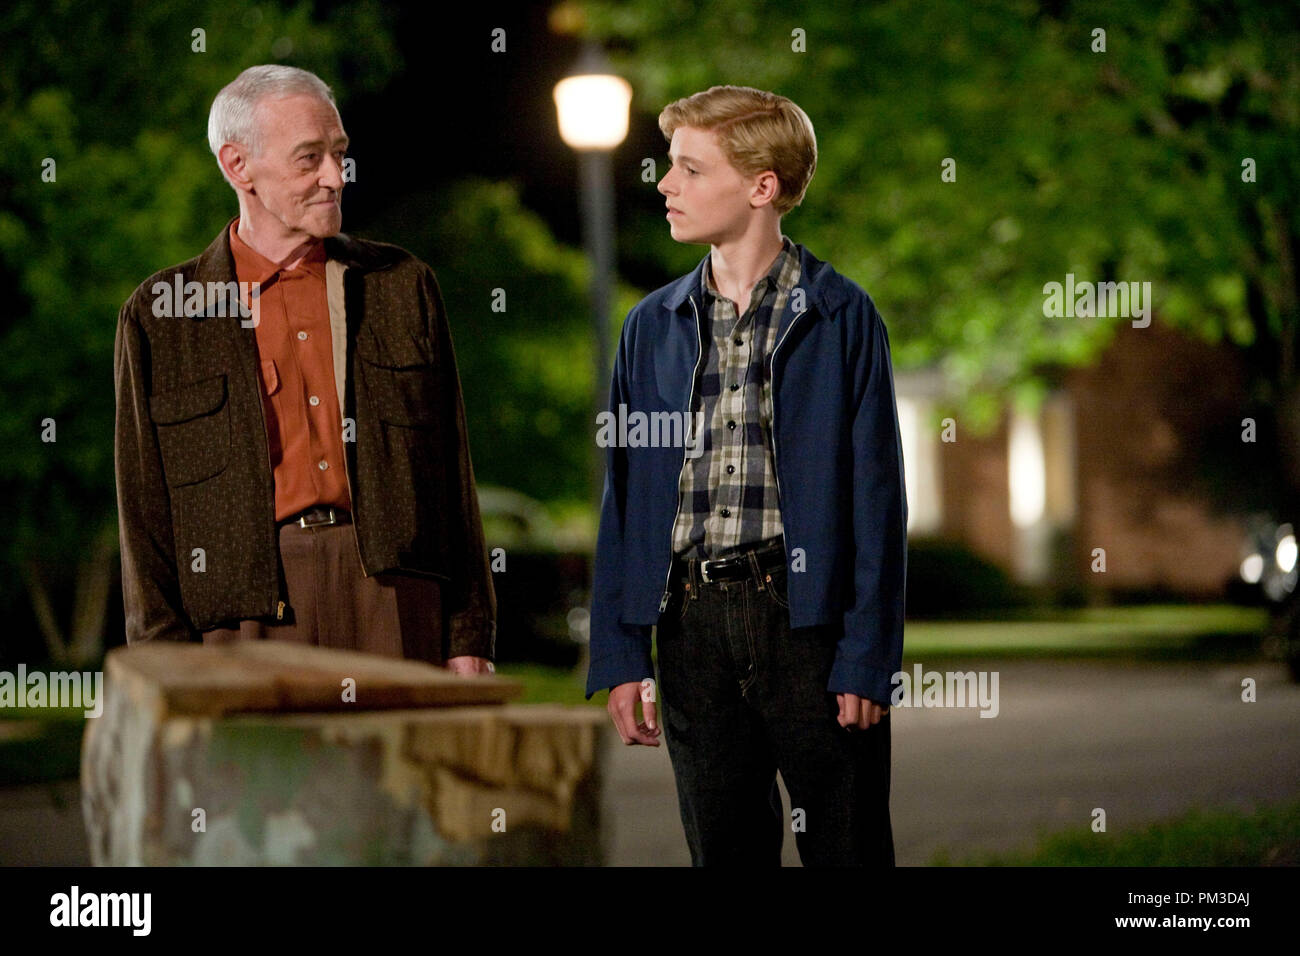 (L-r) JOHN MAHONEY as Chet Duncan and CALLAN McAULIFFE as Bryce Loski in Castle Rock Entertainment’s coming-of-age romantic comedy “FLIPPED,” a Warner Bros. Pictures release. Stock Photo